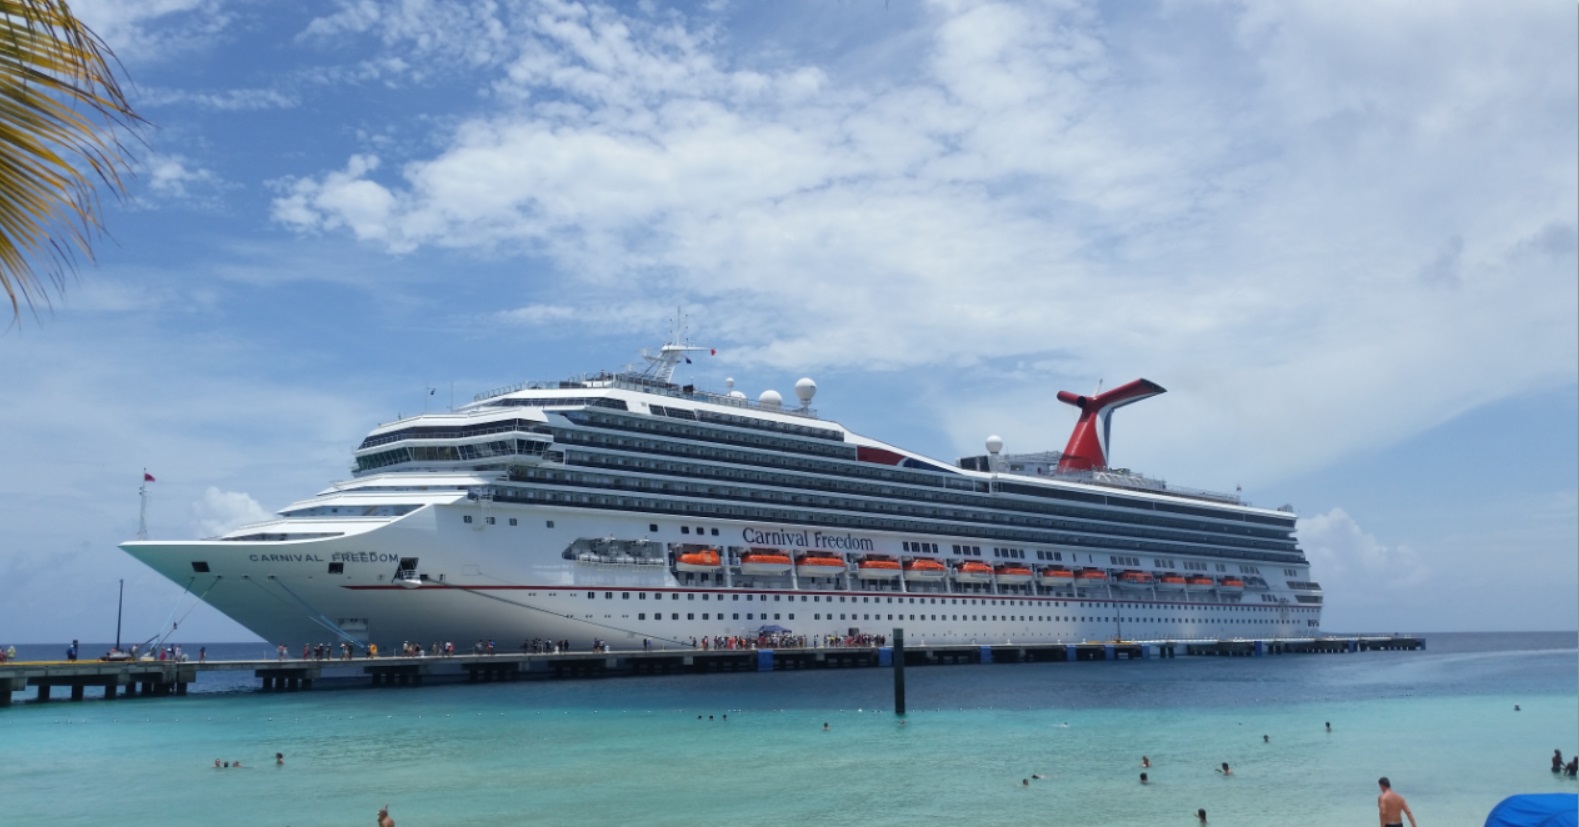 Top 10 things to do on the Carnival Freedom